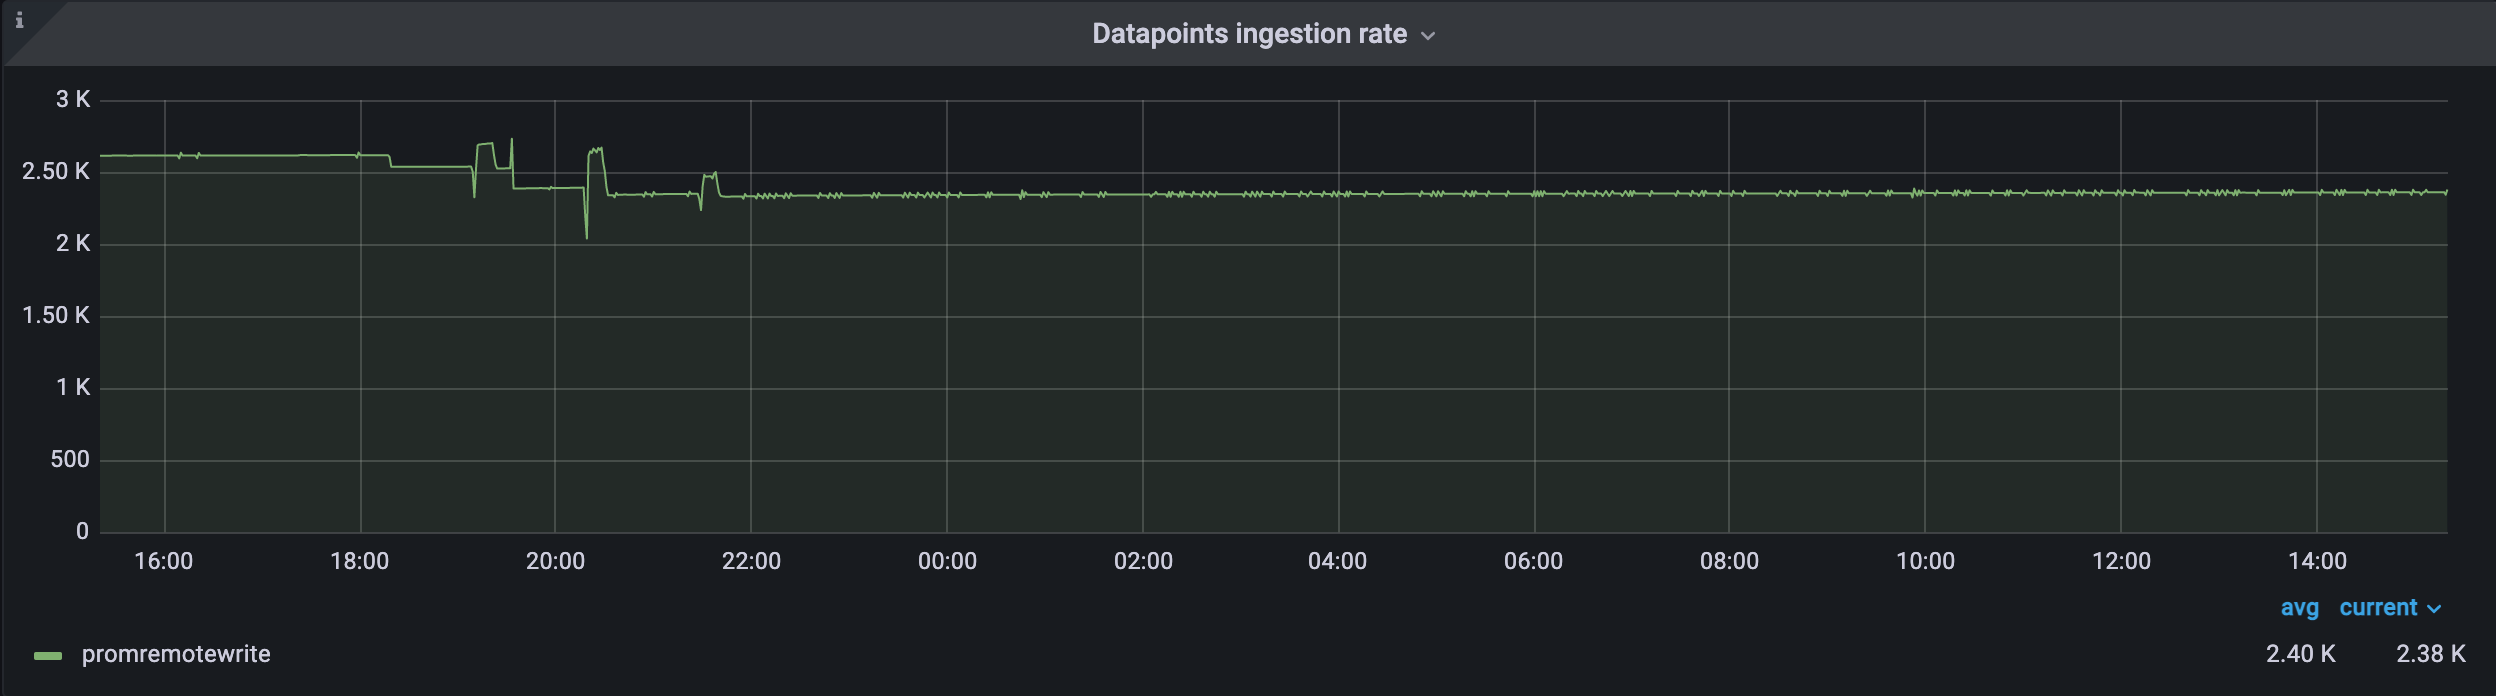 Datapoints ingestion rate after applying relabeling config